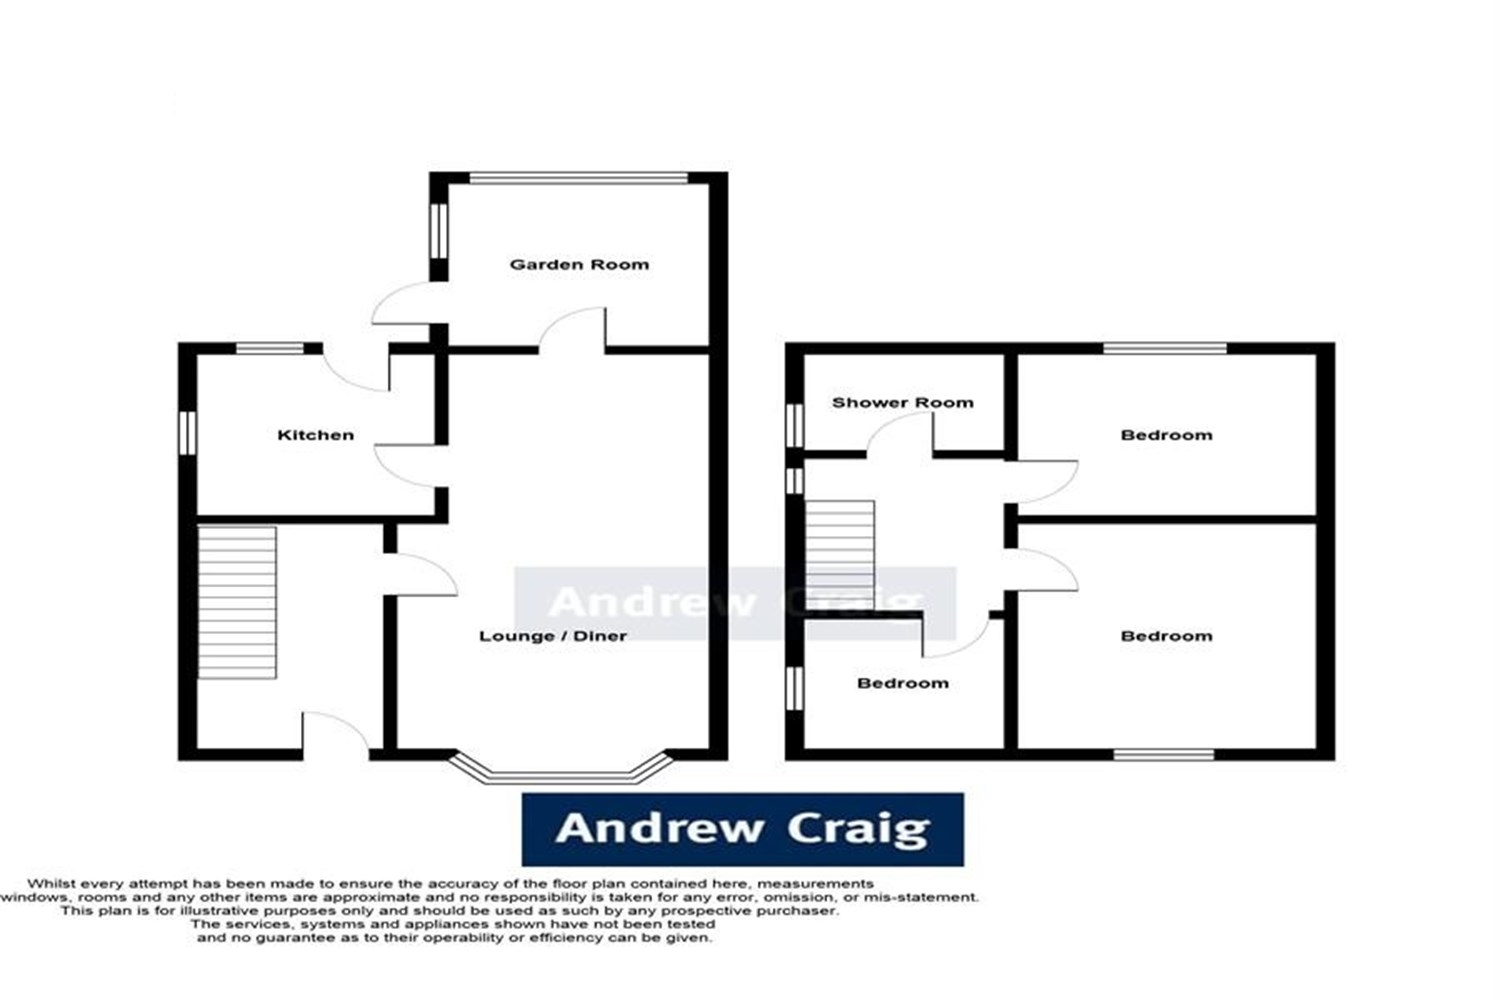 3 bed semi-detached house for sale in Bamburgh Avenue, South Shields - Property floorplan